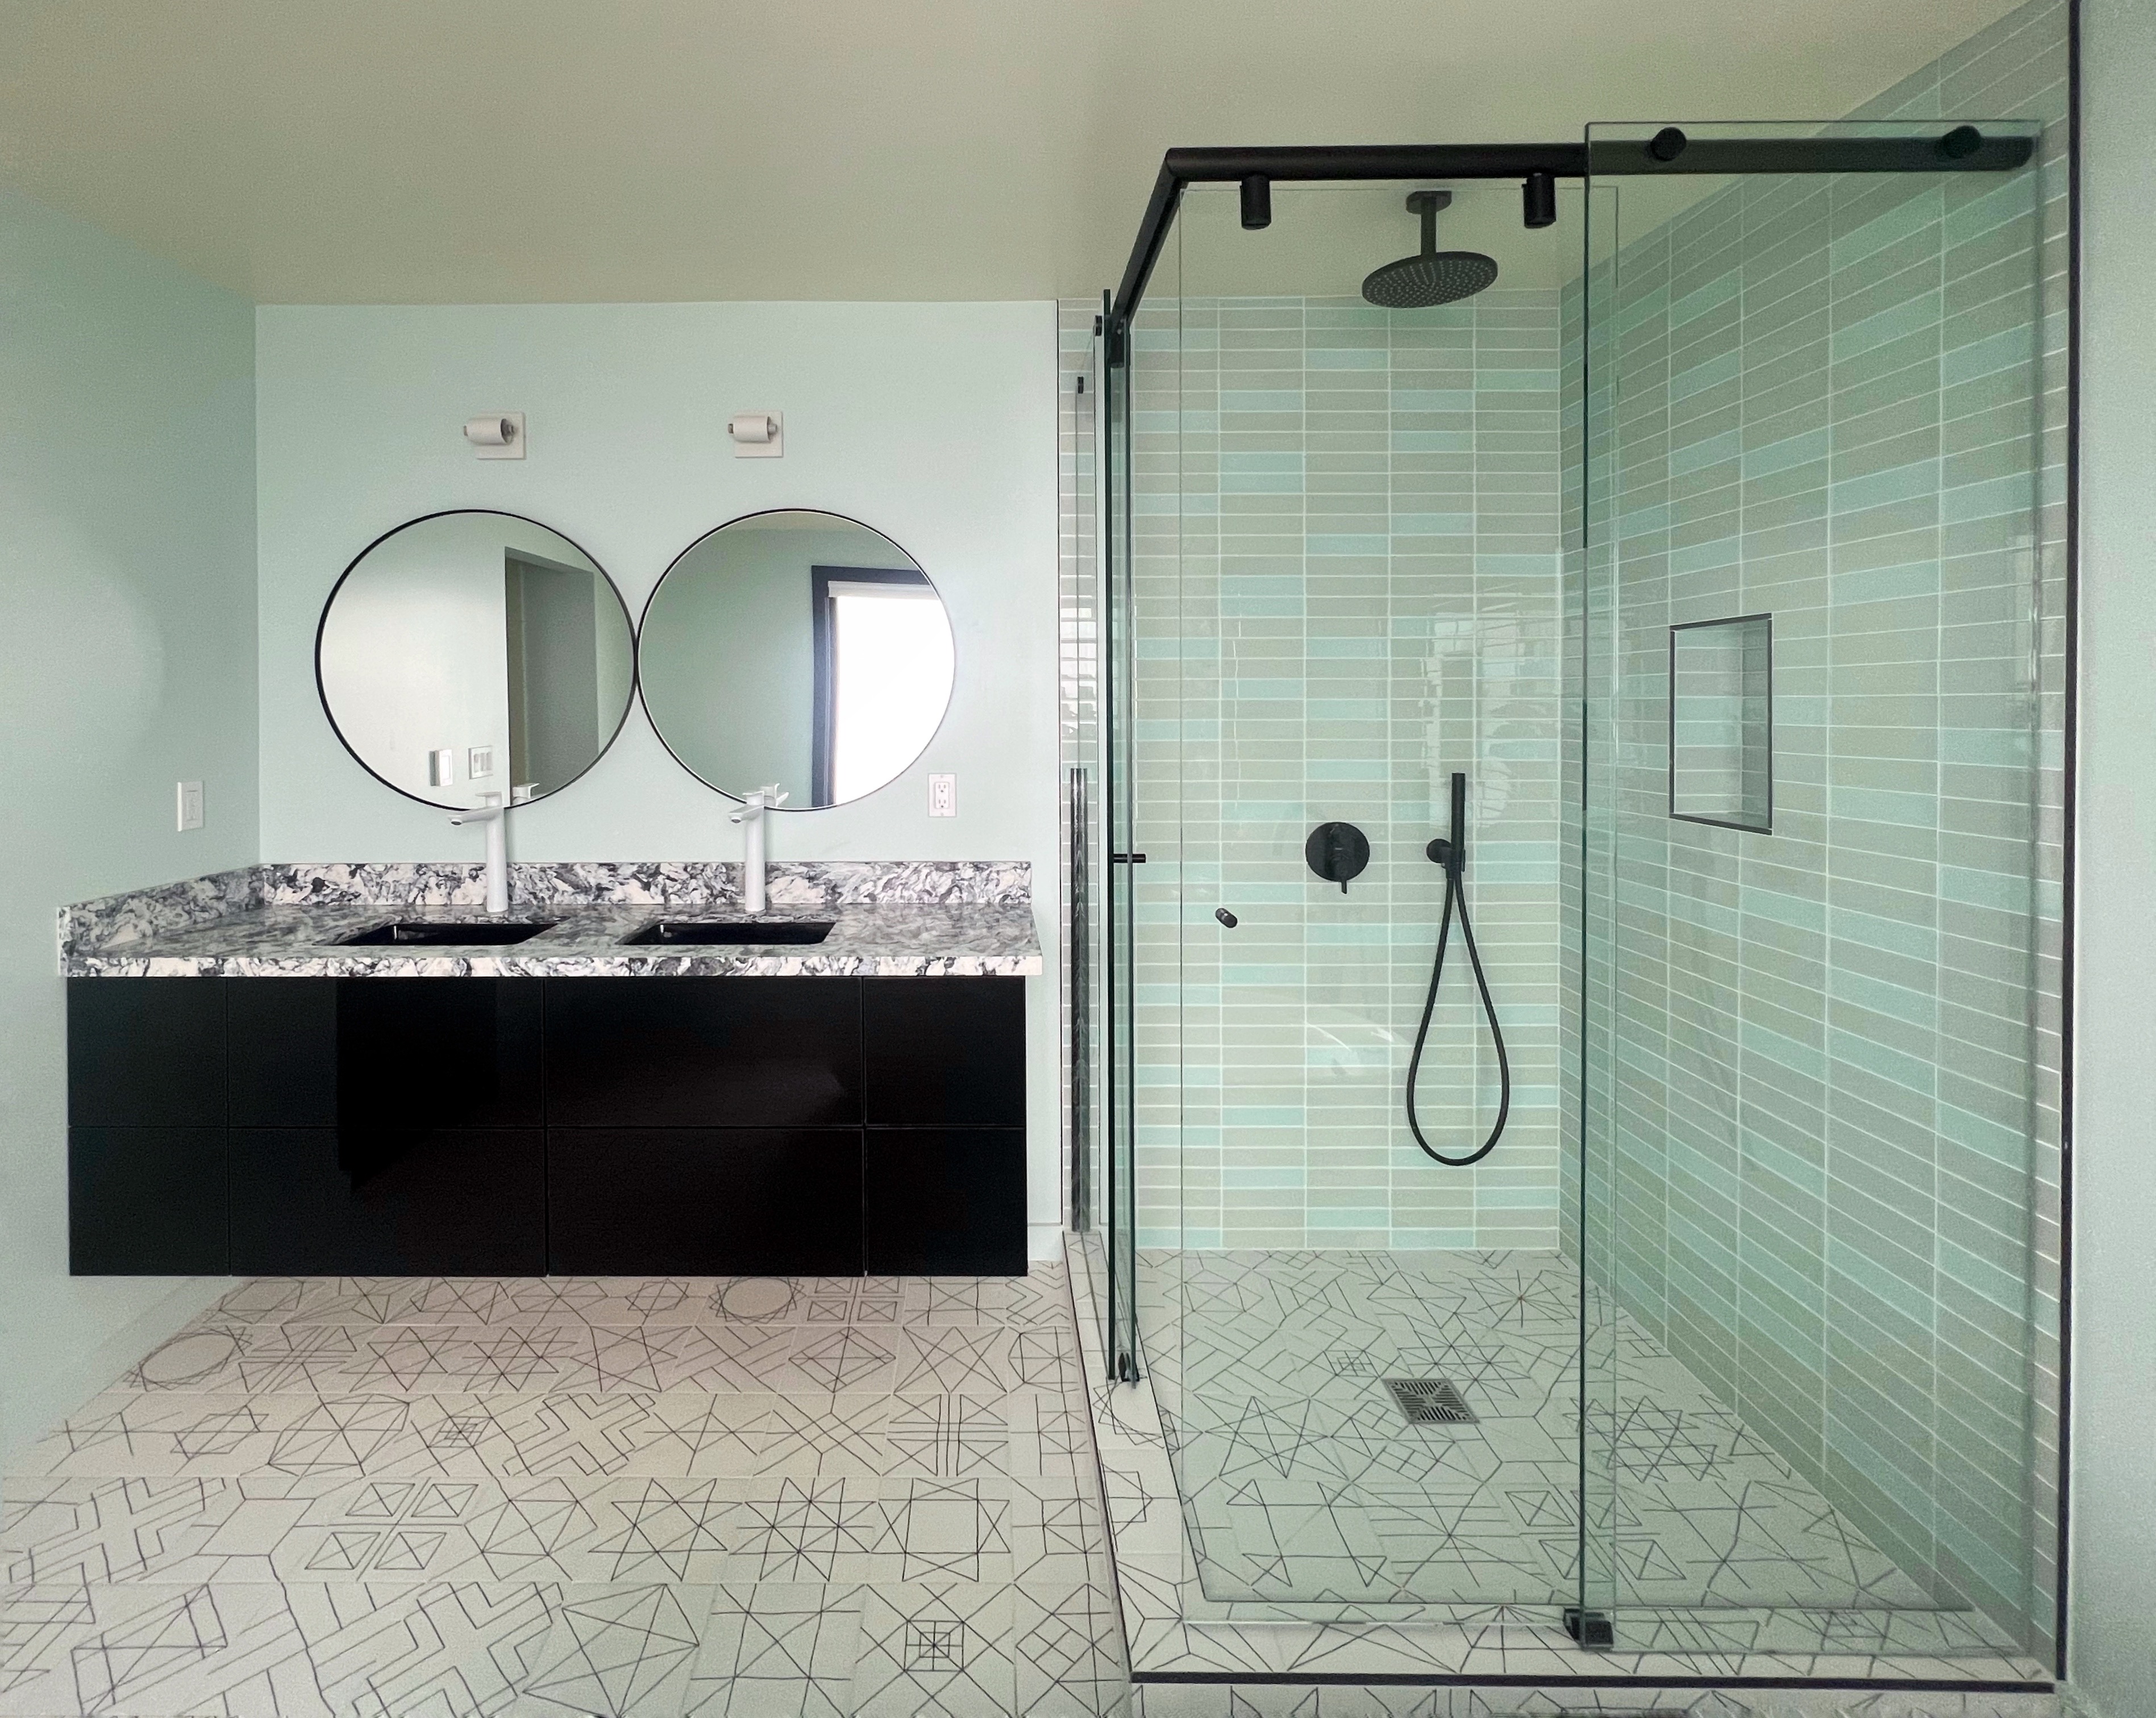 Bathroom Remodeling Contractor in Middlesex County NJ